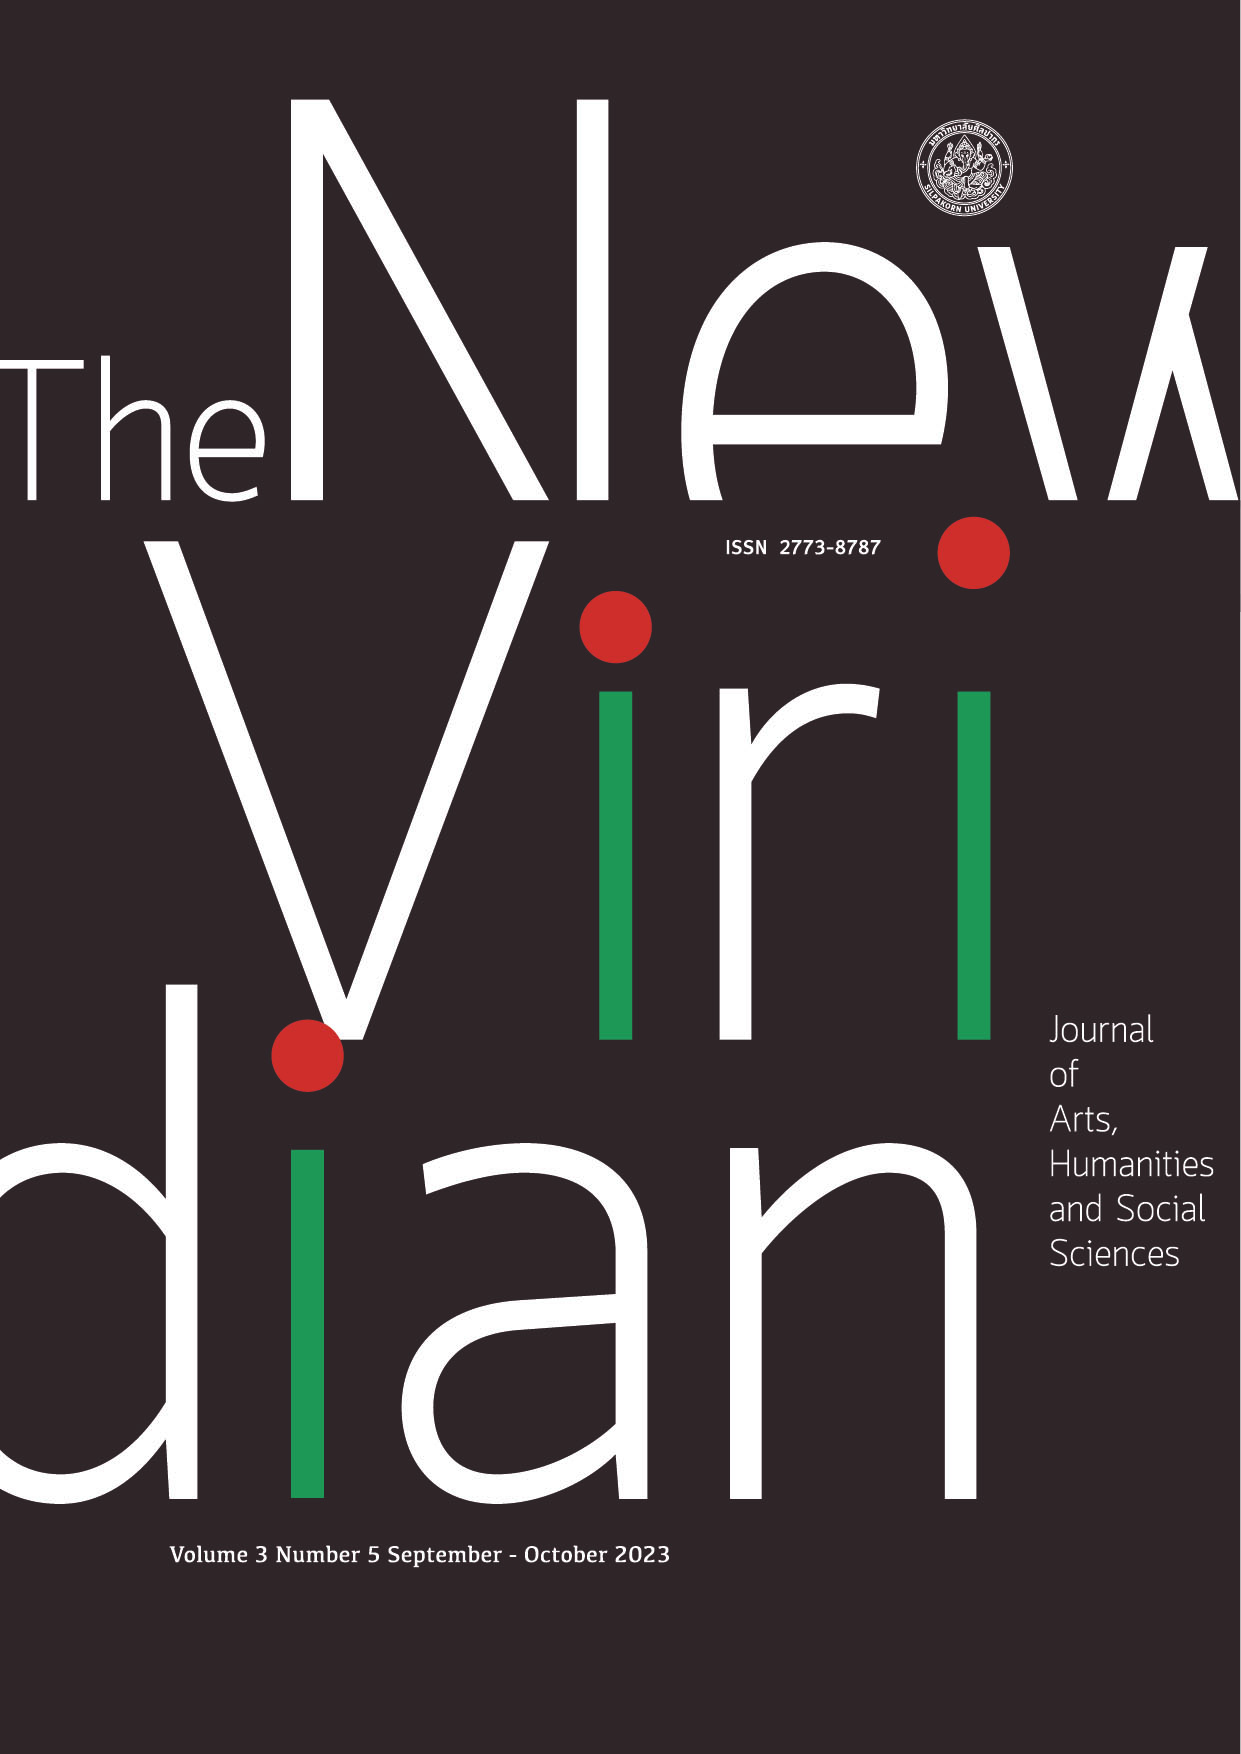 					View Vol. 3 No. 5 (2023): The New Viridian Journal of Arts, Humanities and Social Sciences (September – October 2023)
				